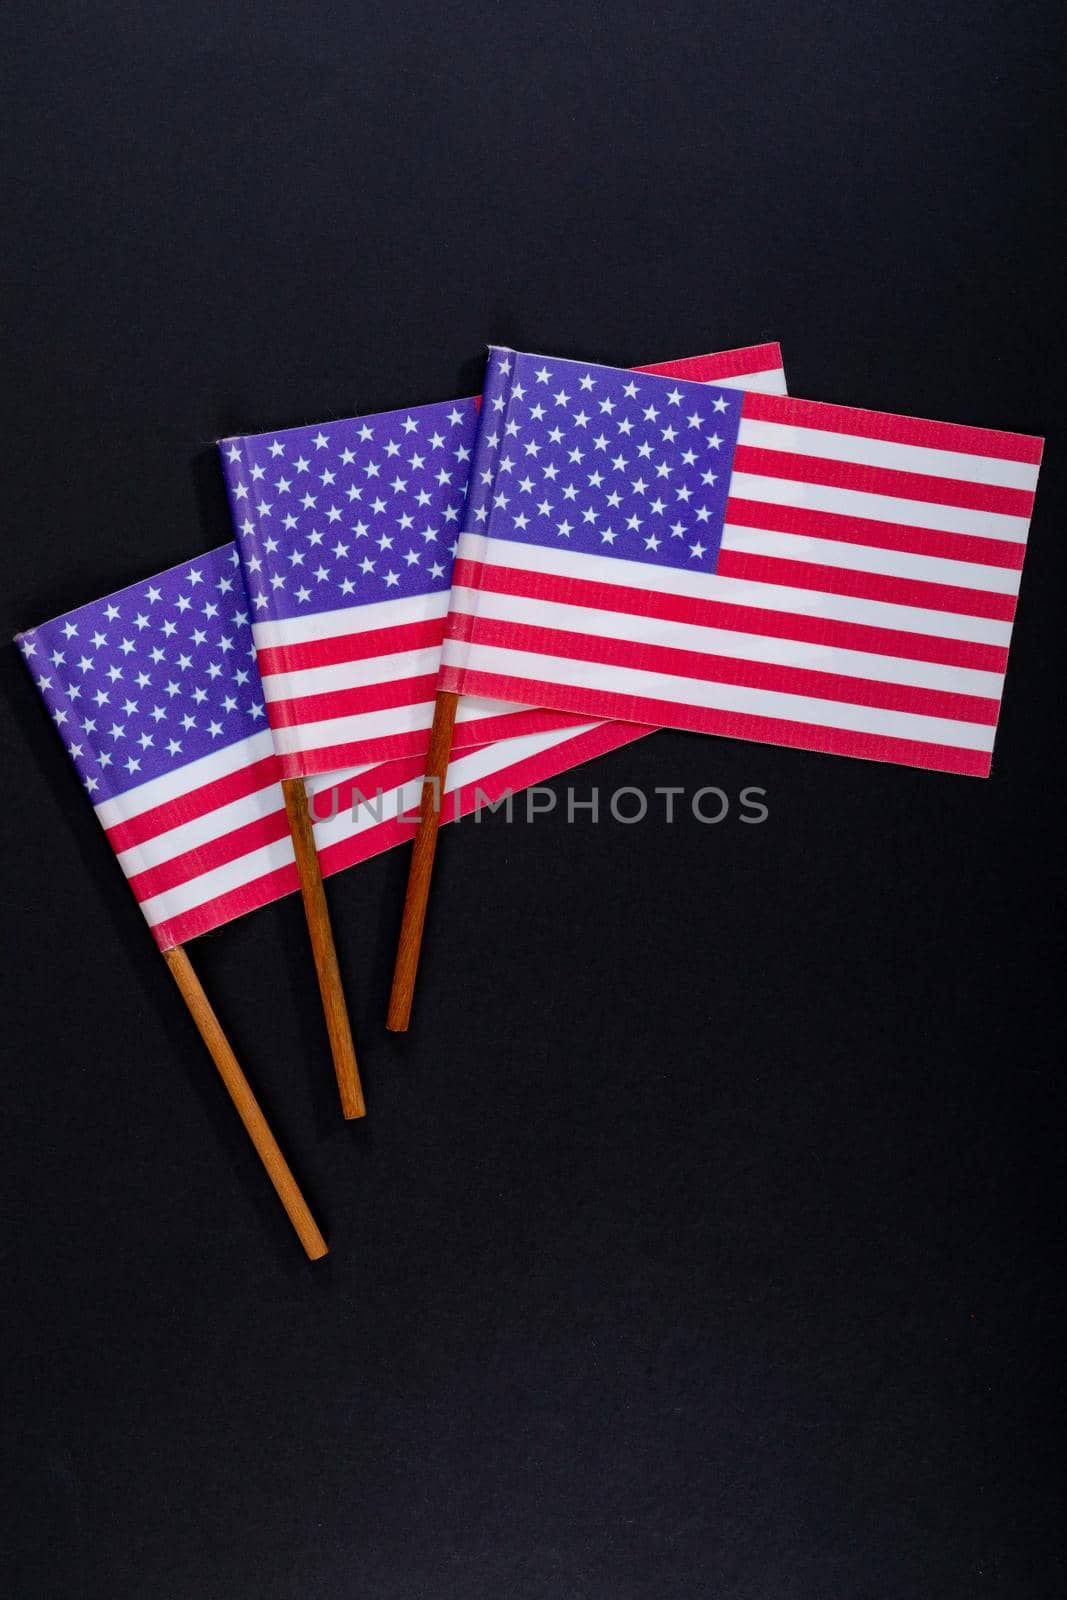 Red and white stripes along with stars on america flag sticks on black background by Wavebreakmedia